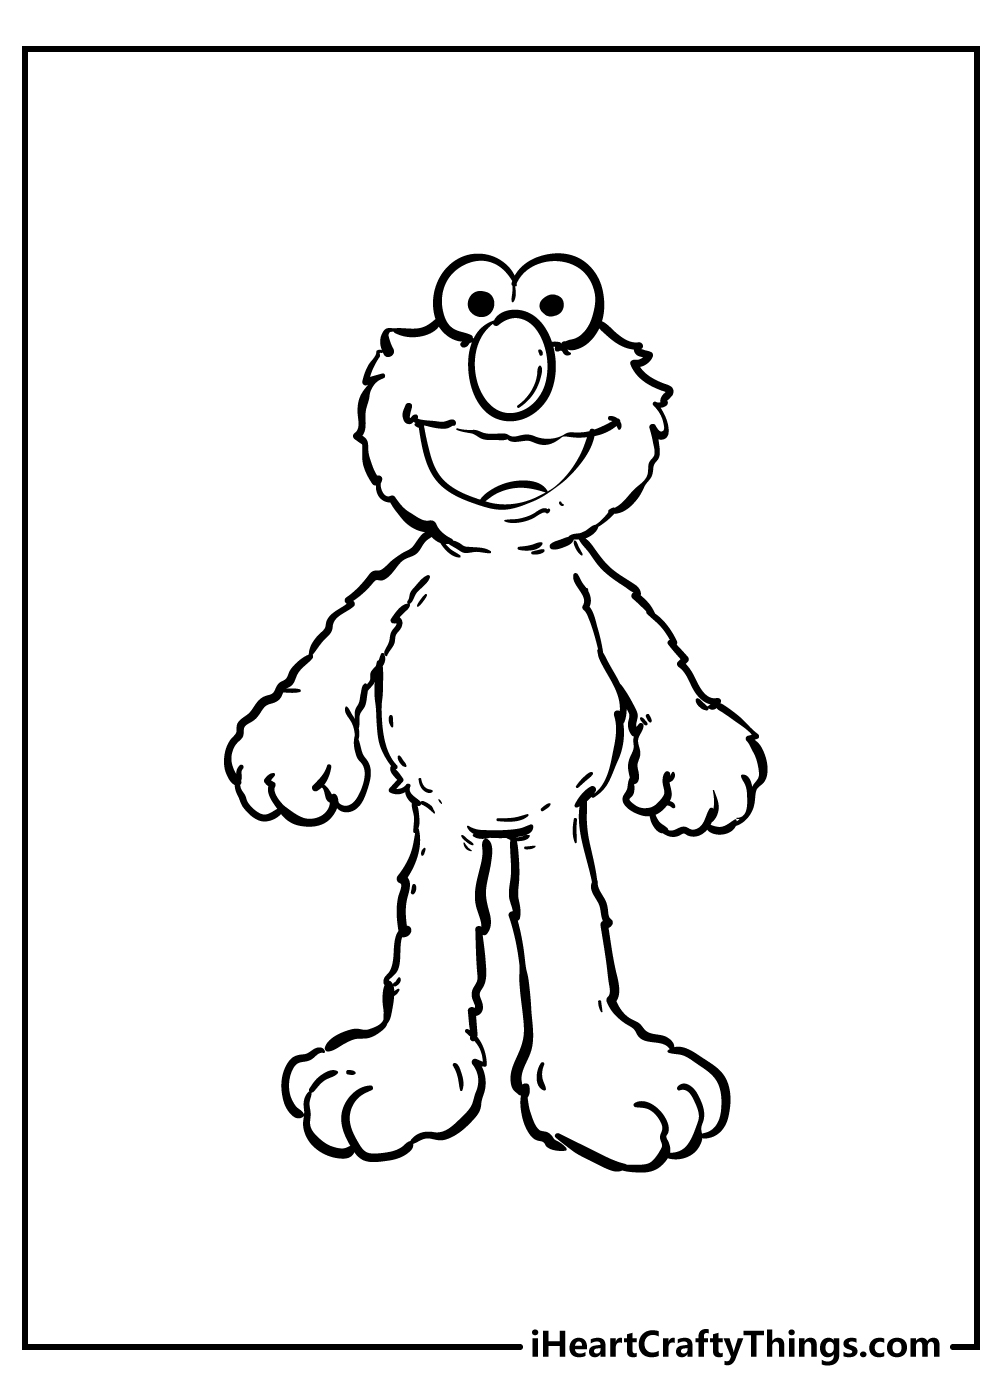 Elmo Coloring Book for kids free